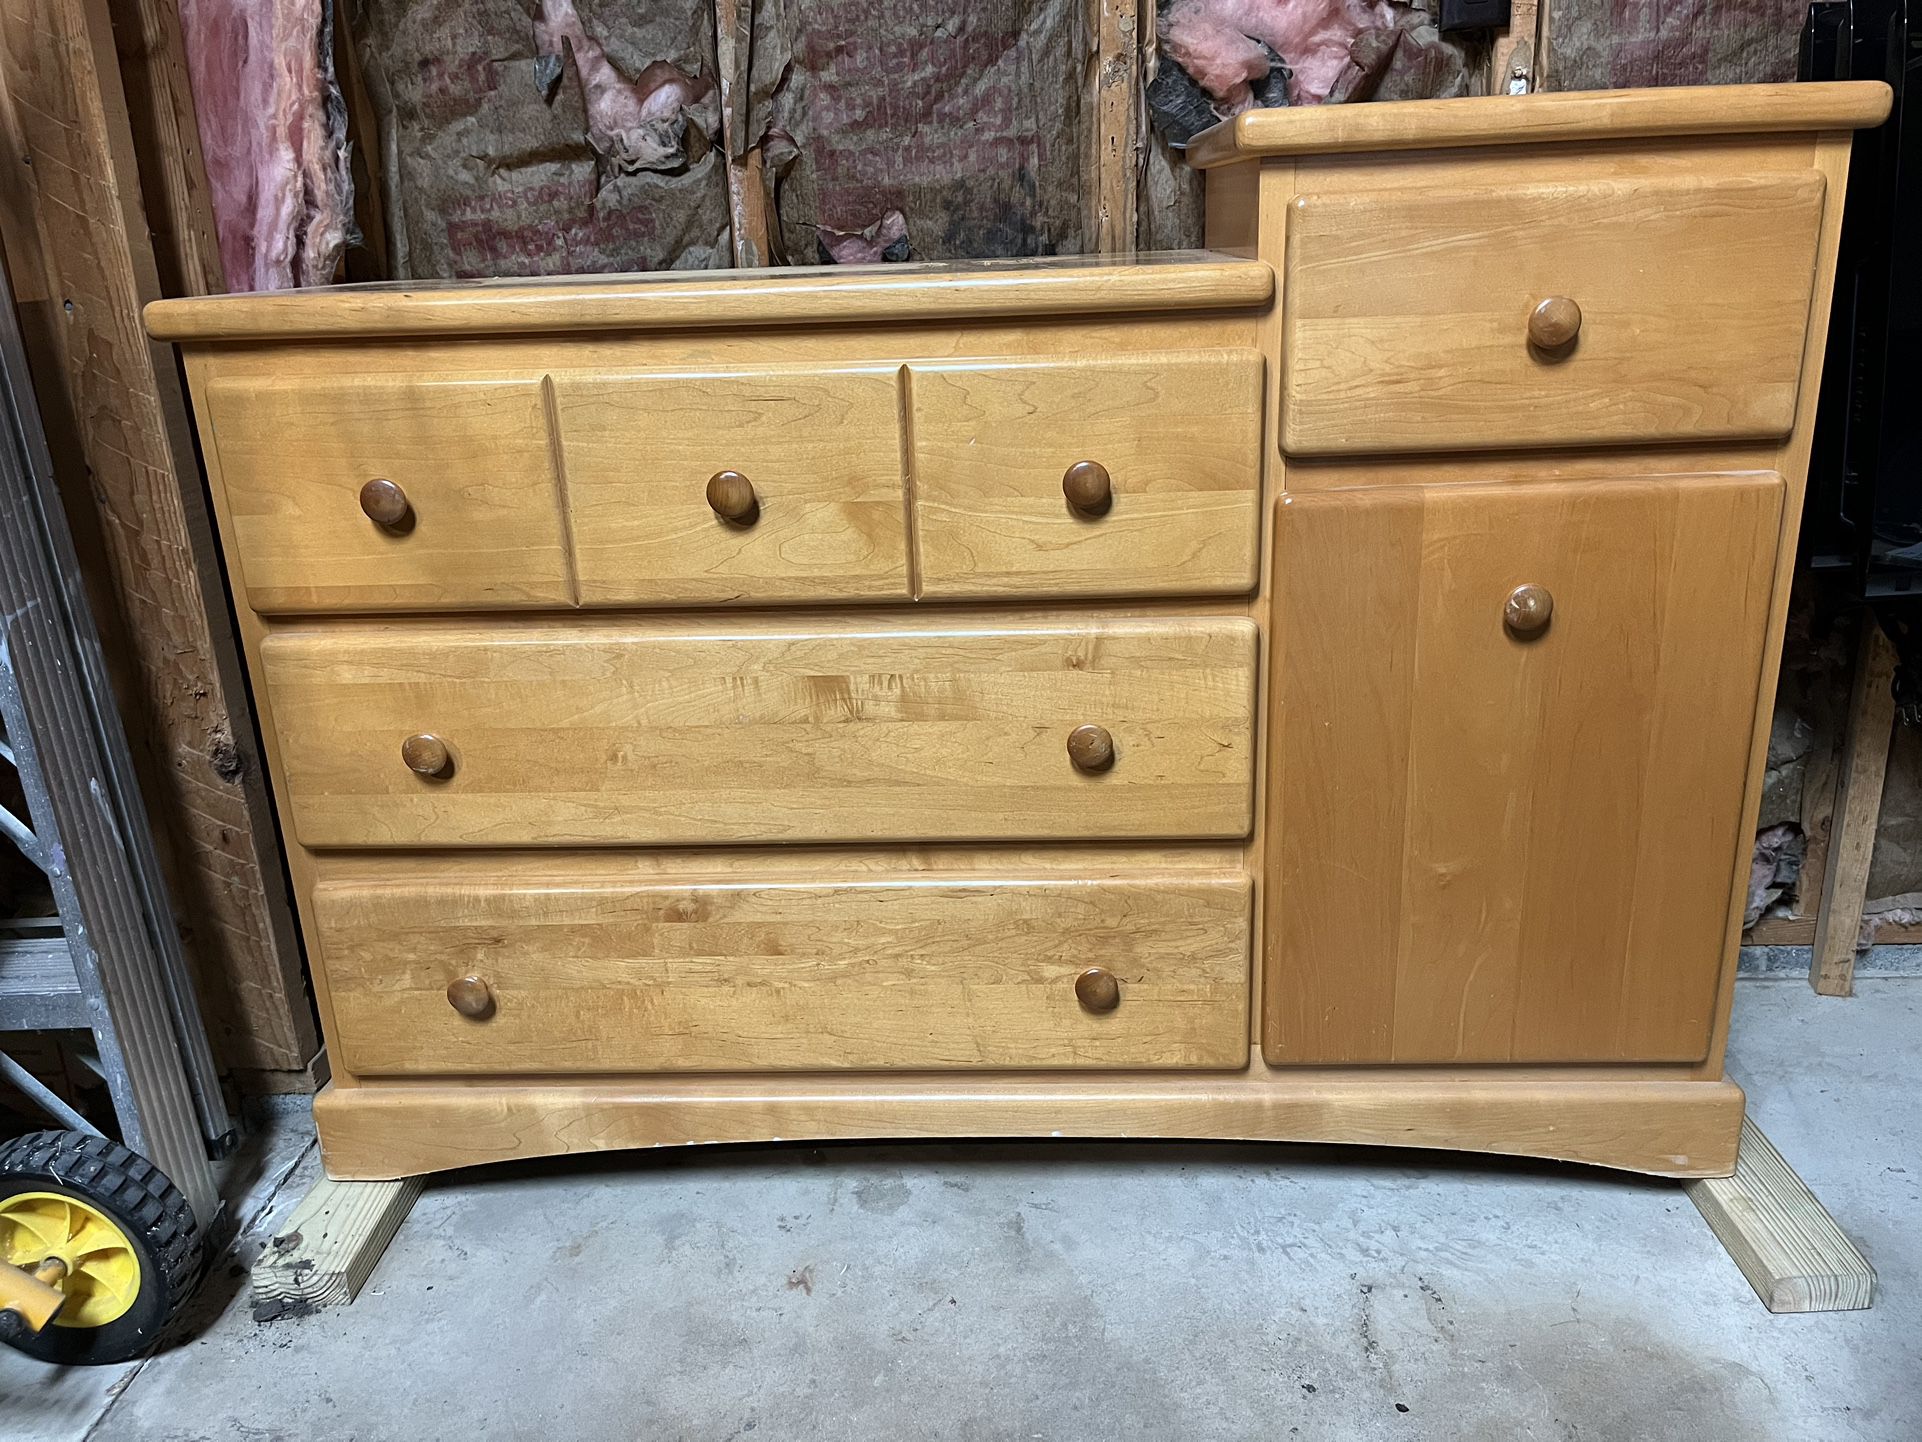 Mother Hubbard’s Cupboards Baby Changing Table / Dresser